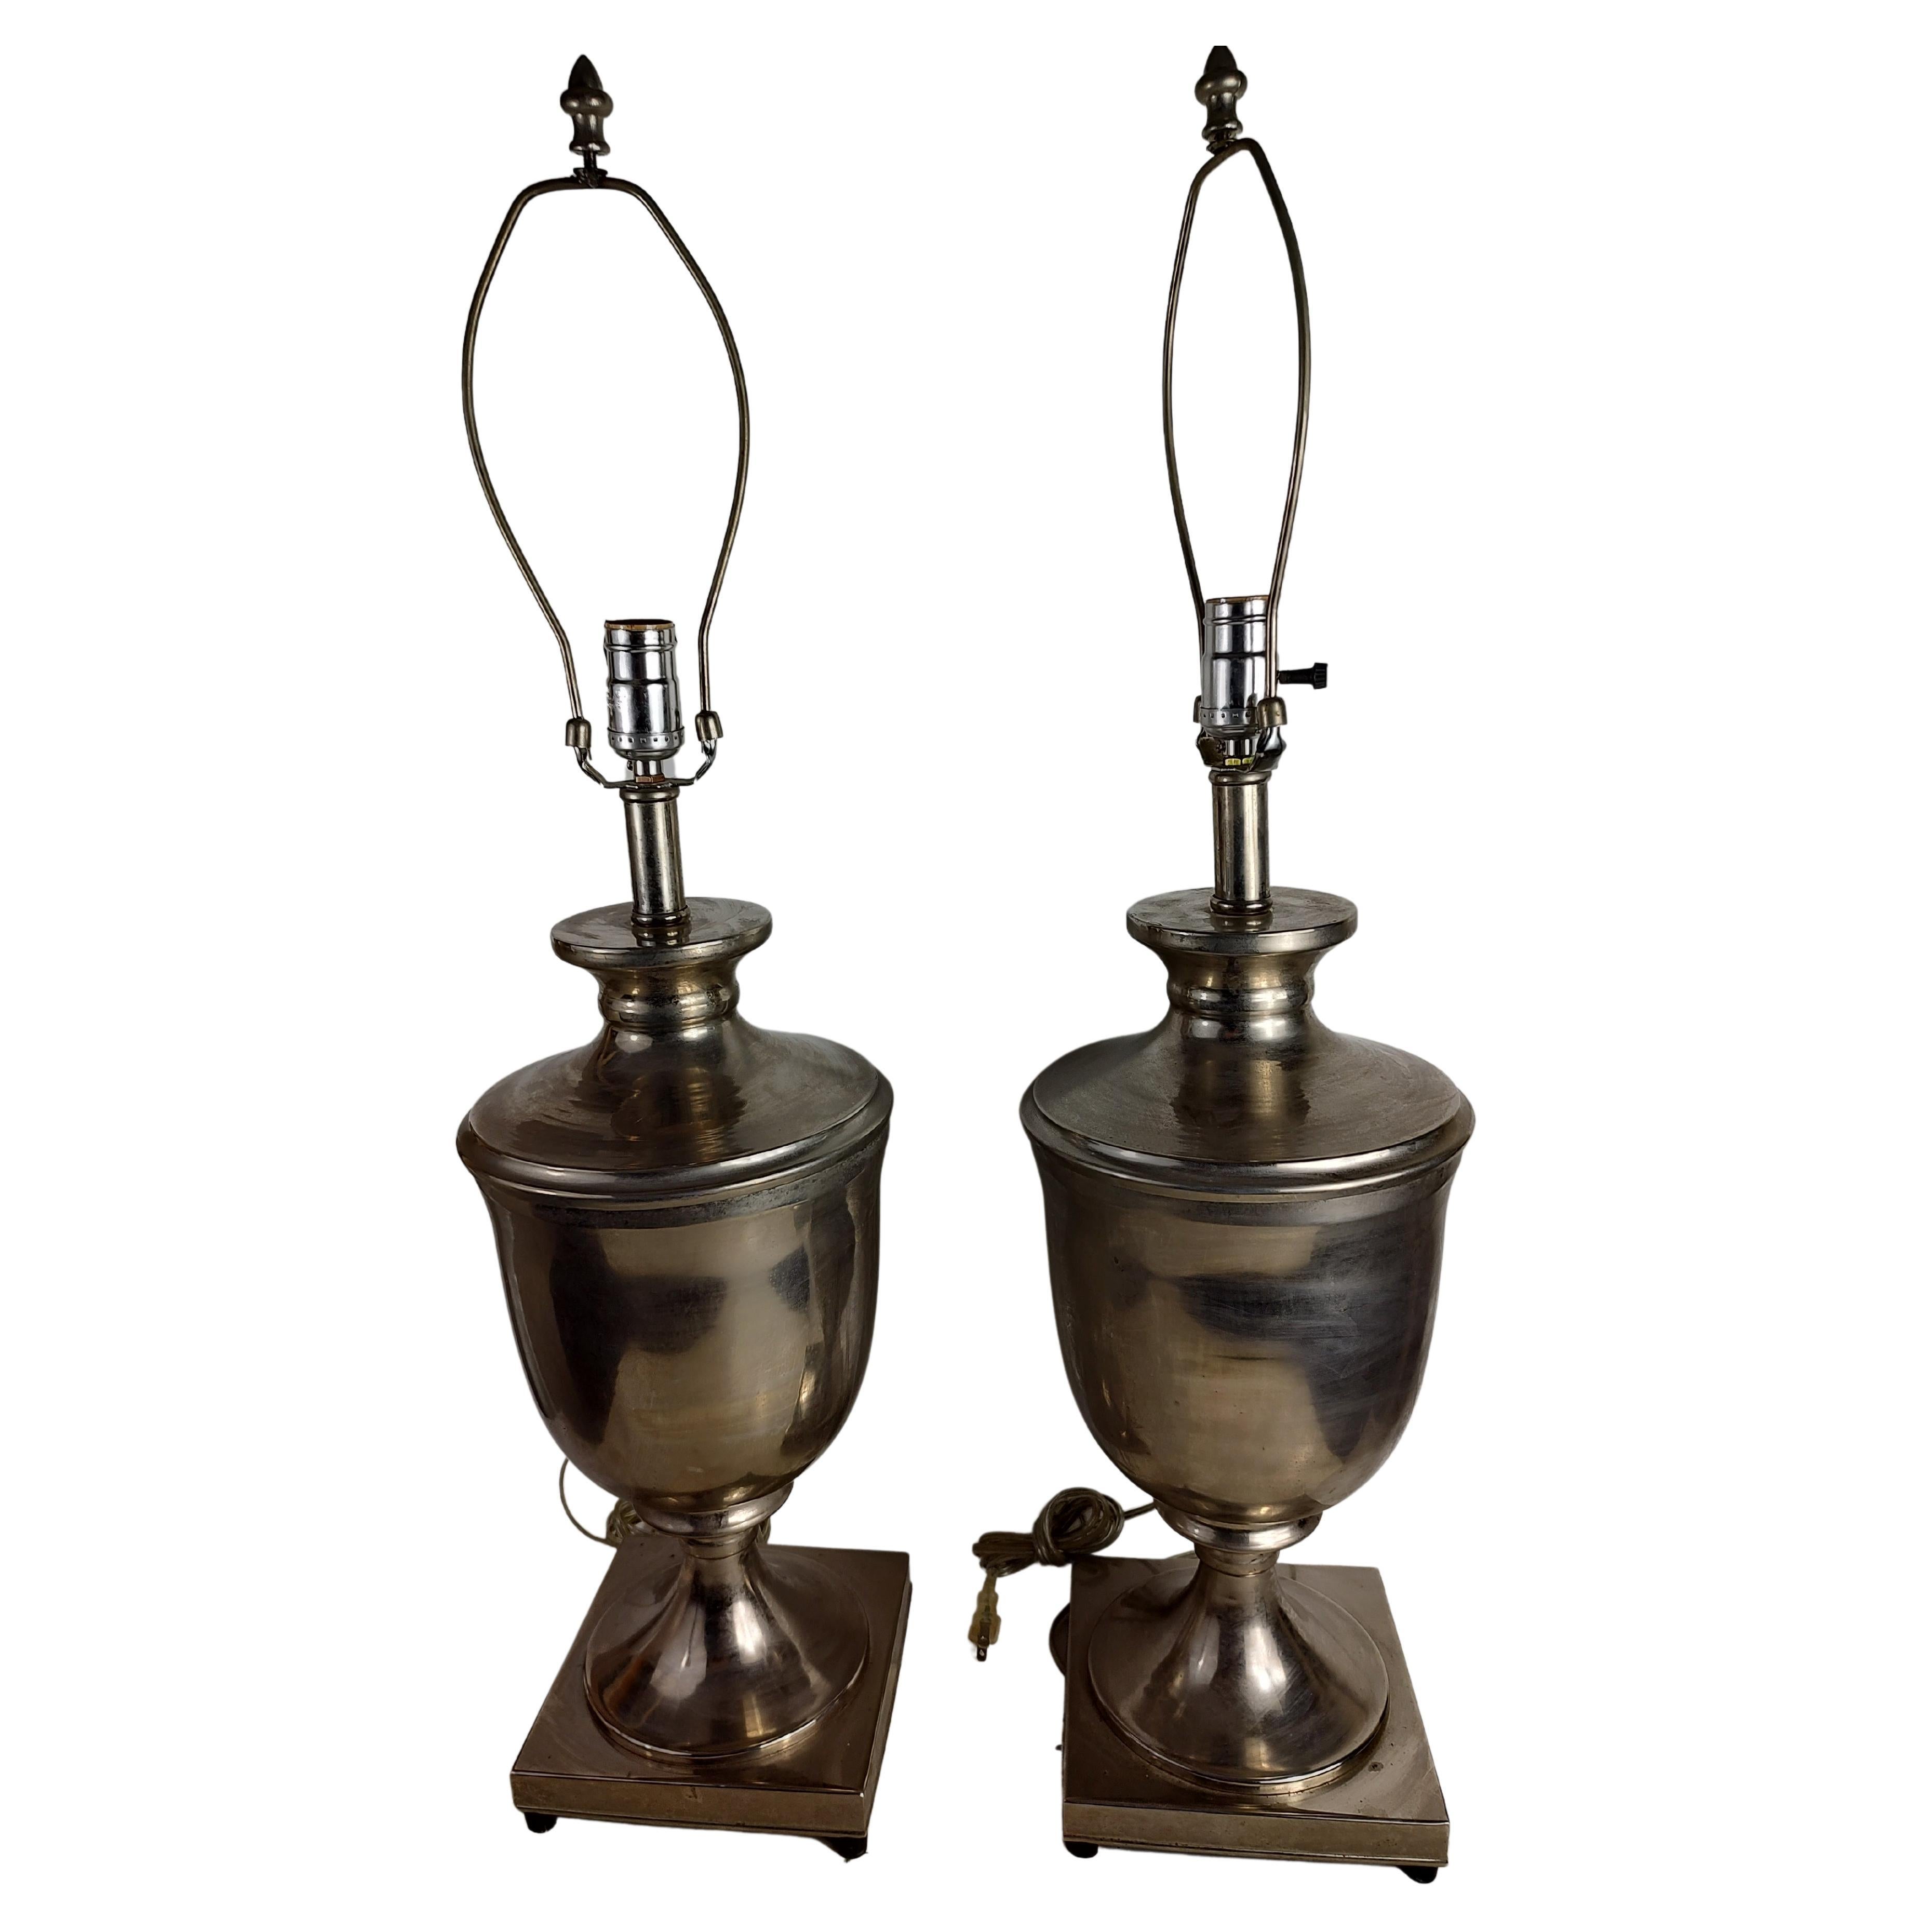 Simple and elegant pair of table lamps in the form of stainless steel urns. Regal in appearance, great size, not cumbersome. In excellent vintage condition with minimal wear. Wiring is sound. Hgt to top of socket is 24 inch, base is 7.25 x 7.25. 